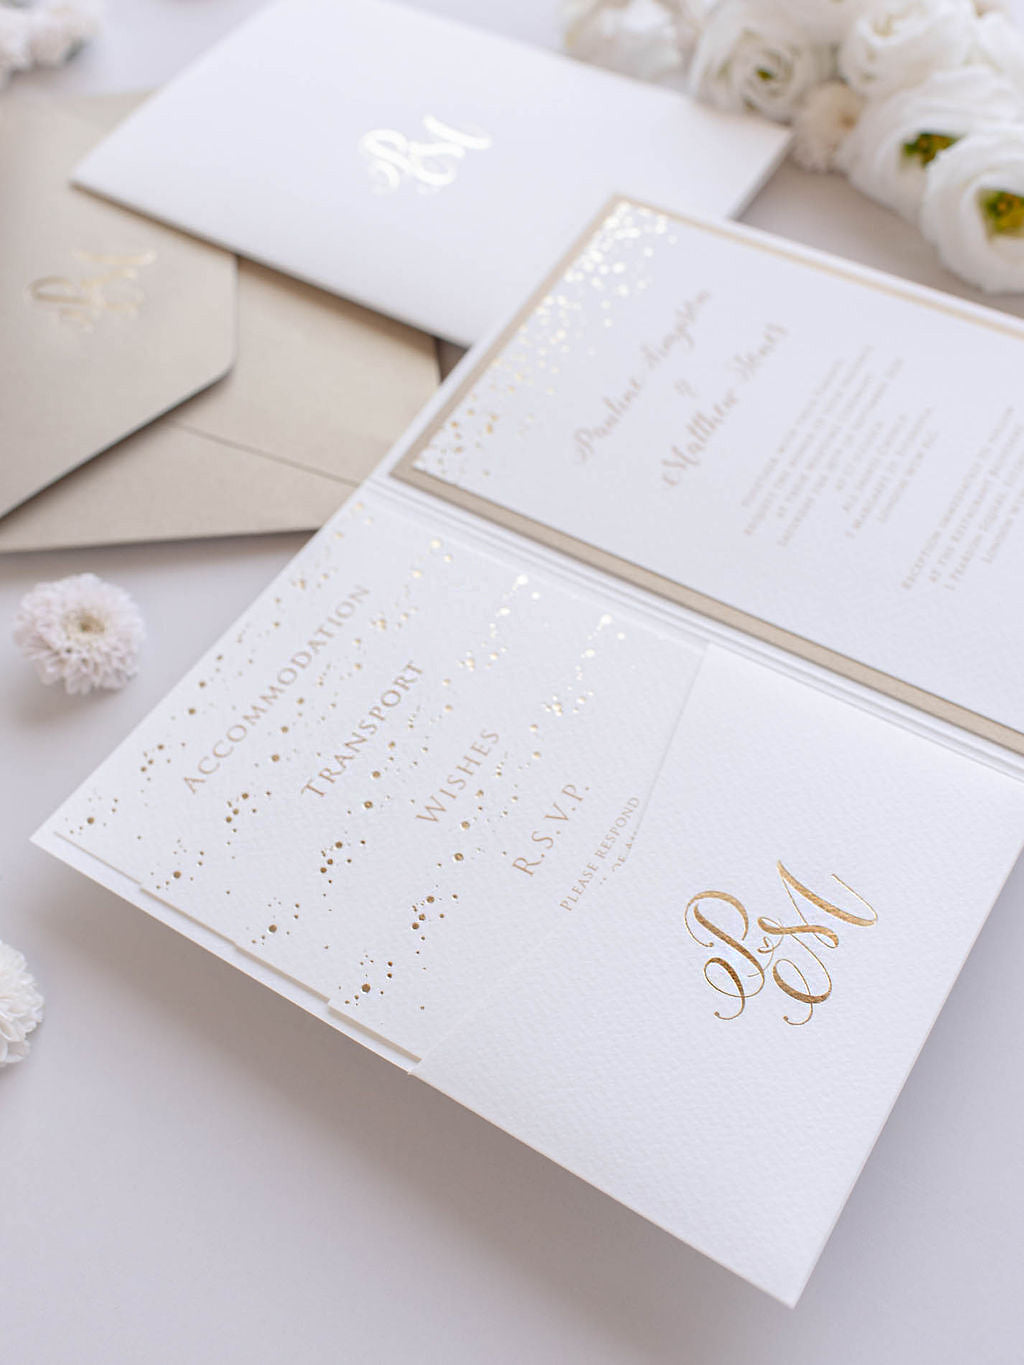 Luxury Floral Pocketstyle Wedding Invitation in White & Pink with 4 Ca –  Cartalia